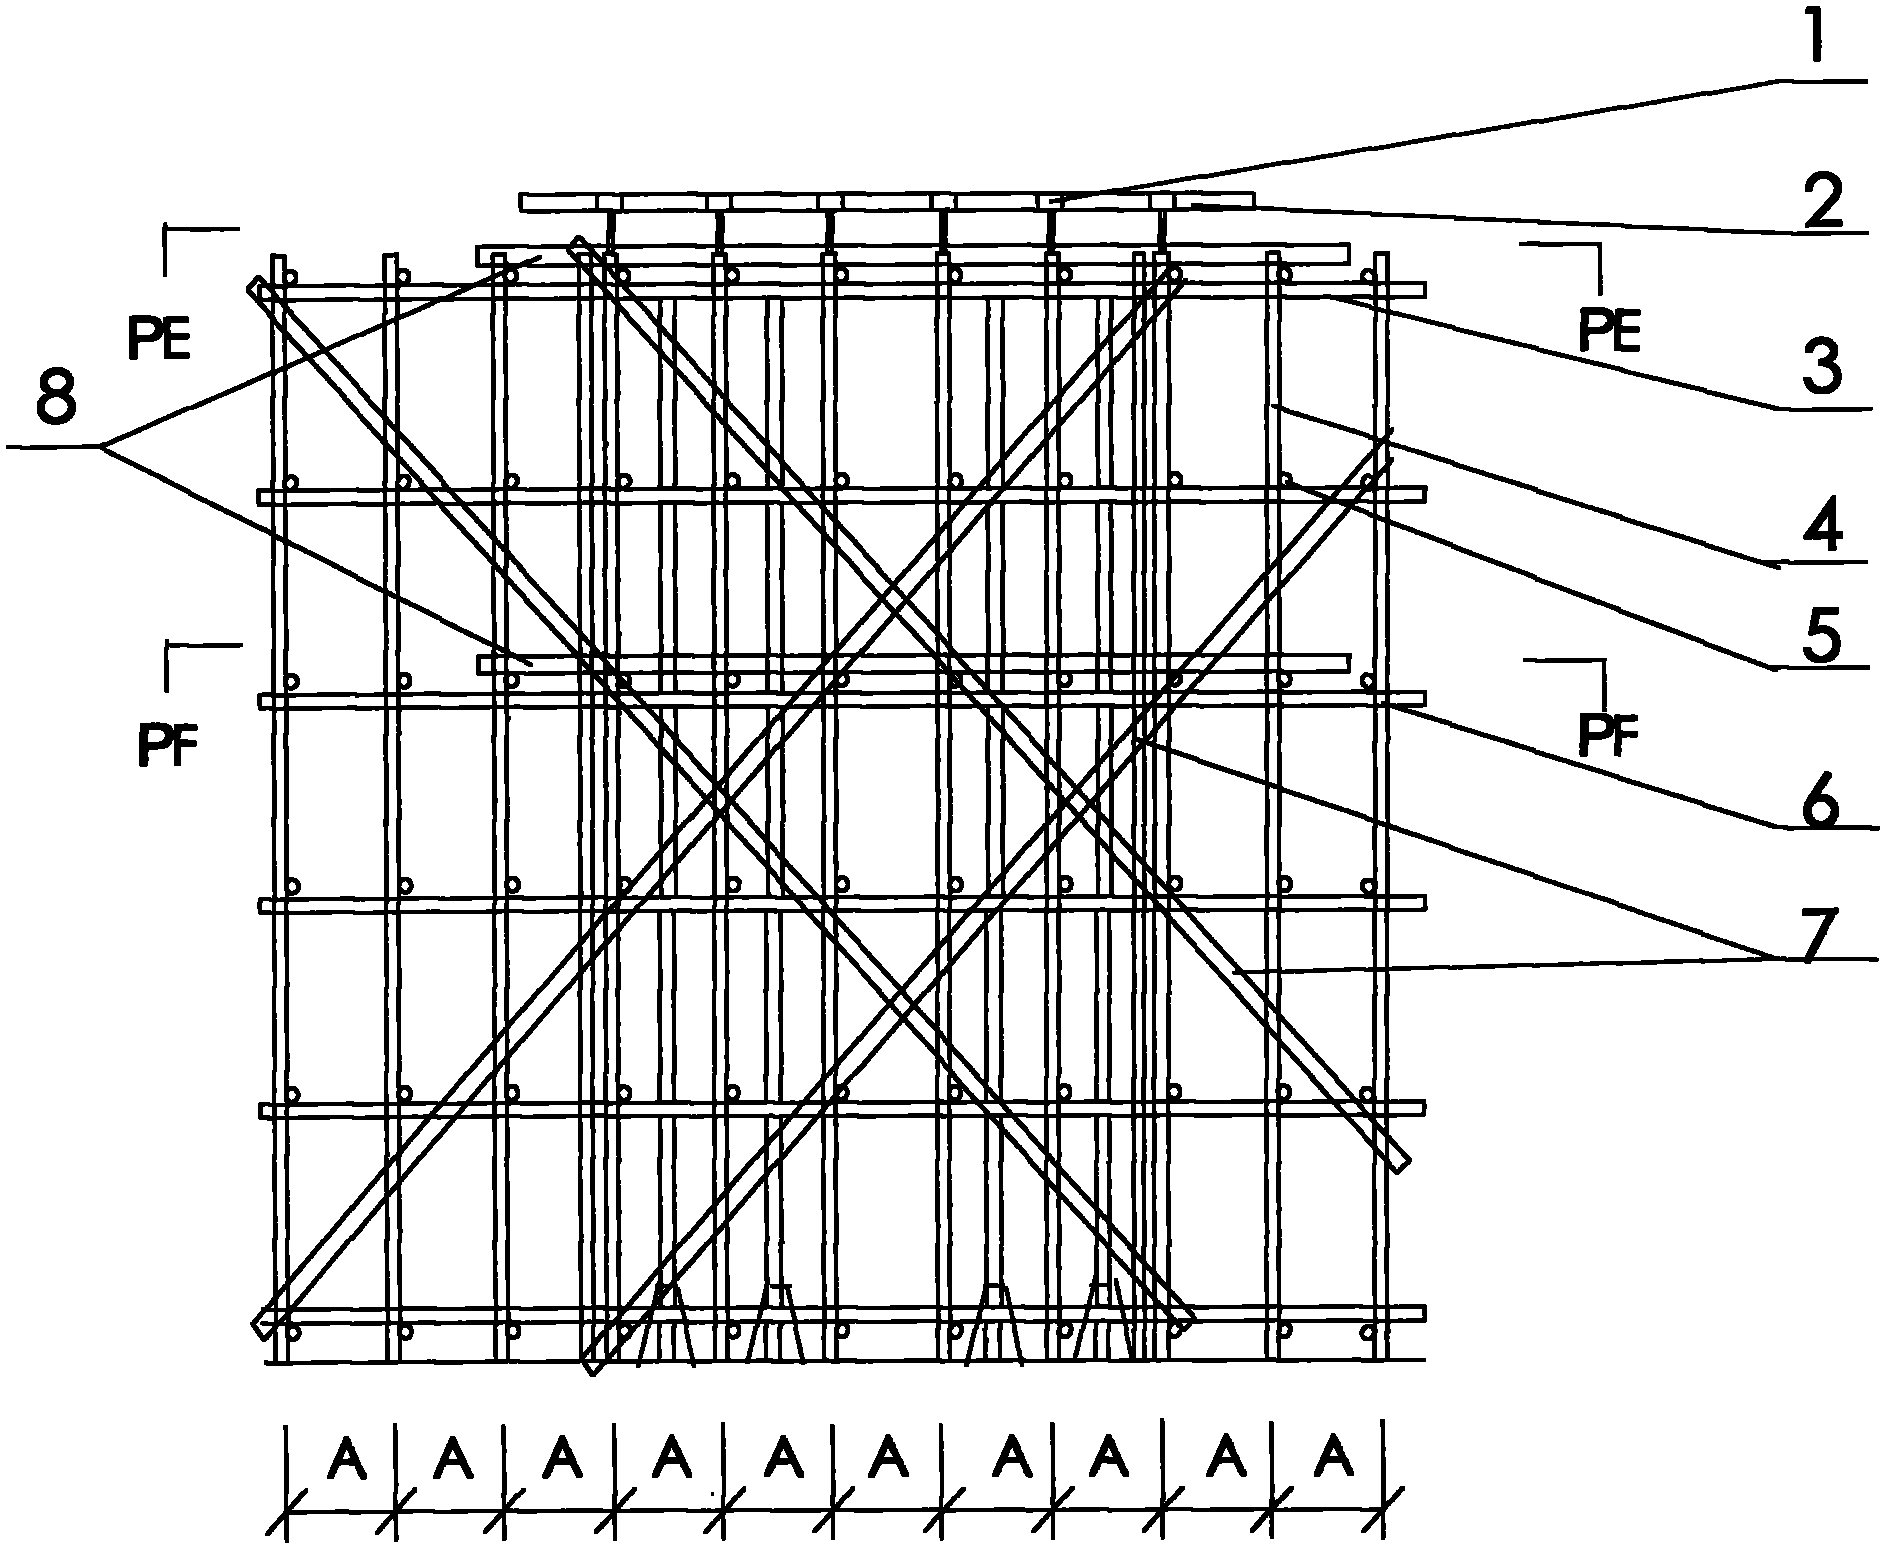 Method for increasing horizontal cross braces and improving and determining bearing capacity of support frame